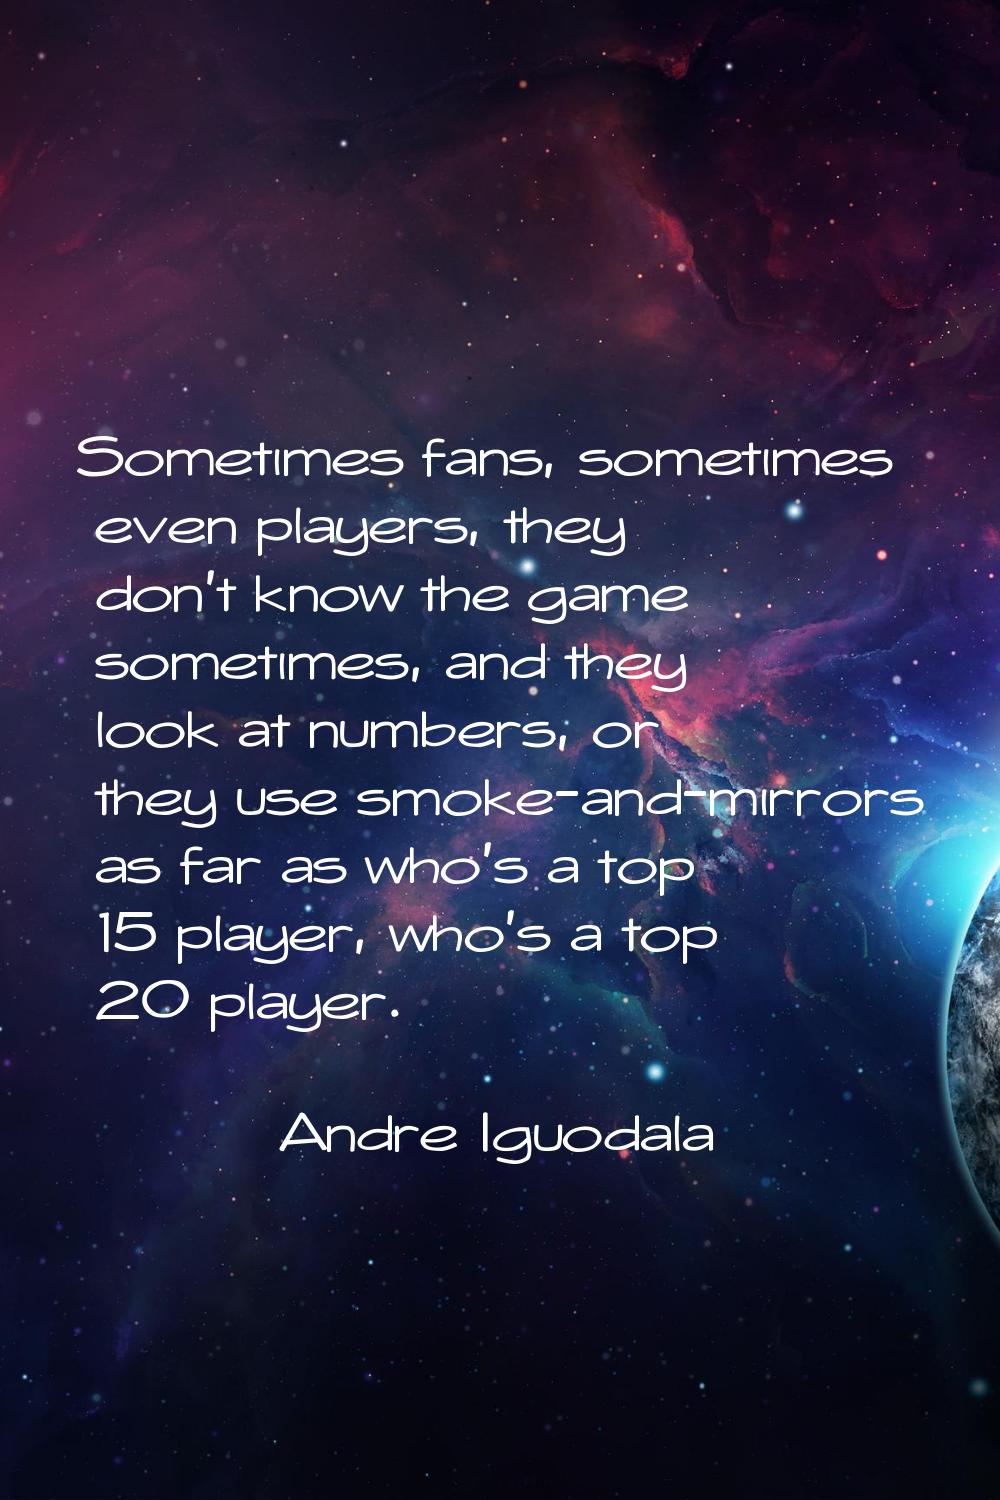 Sometimes fans, sometimes even players, they don't know the game sometimes, and they look at number